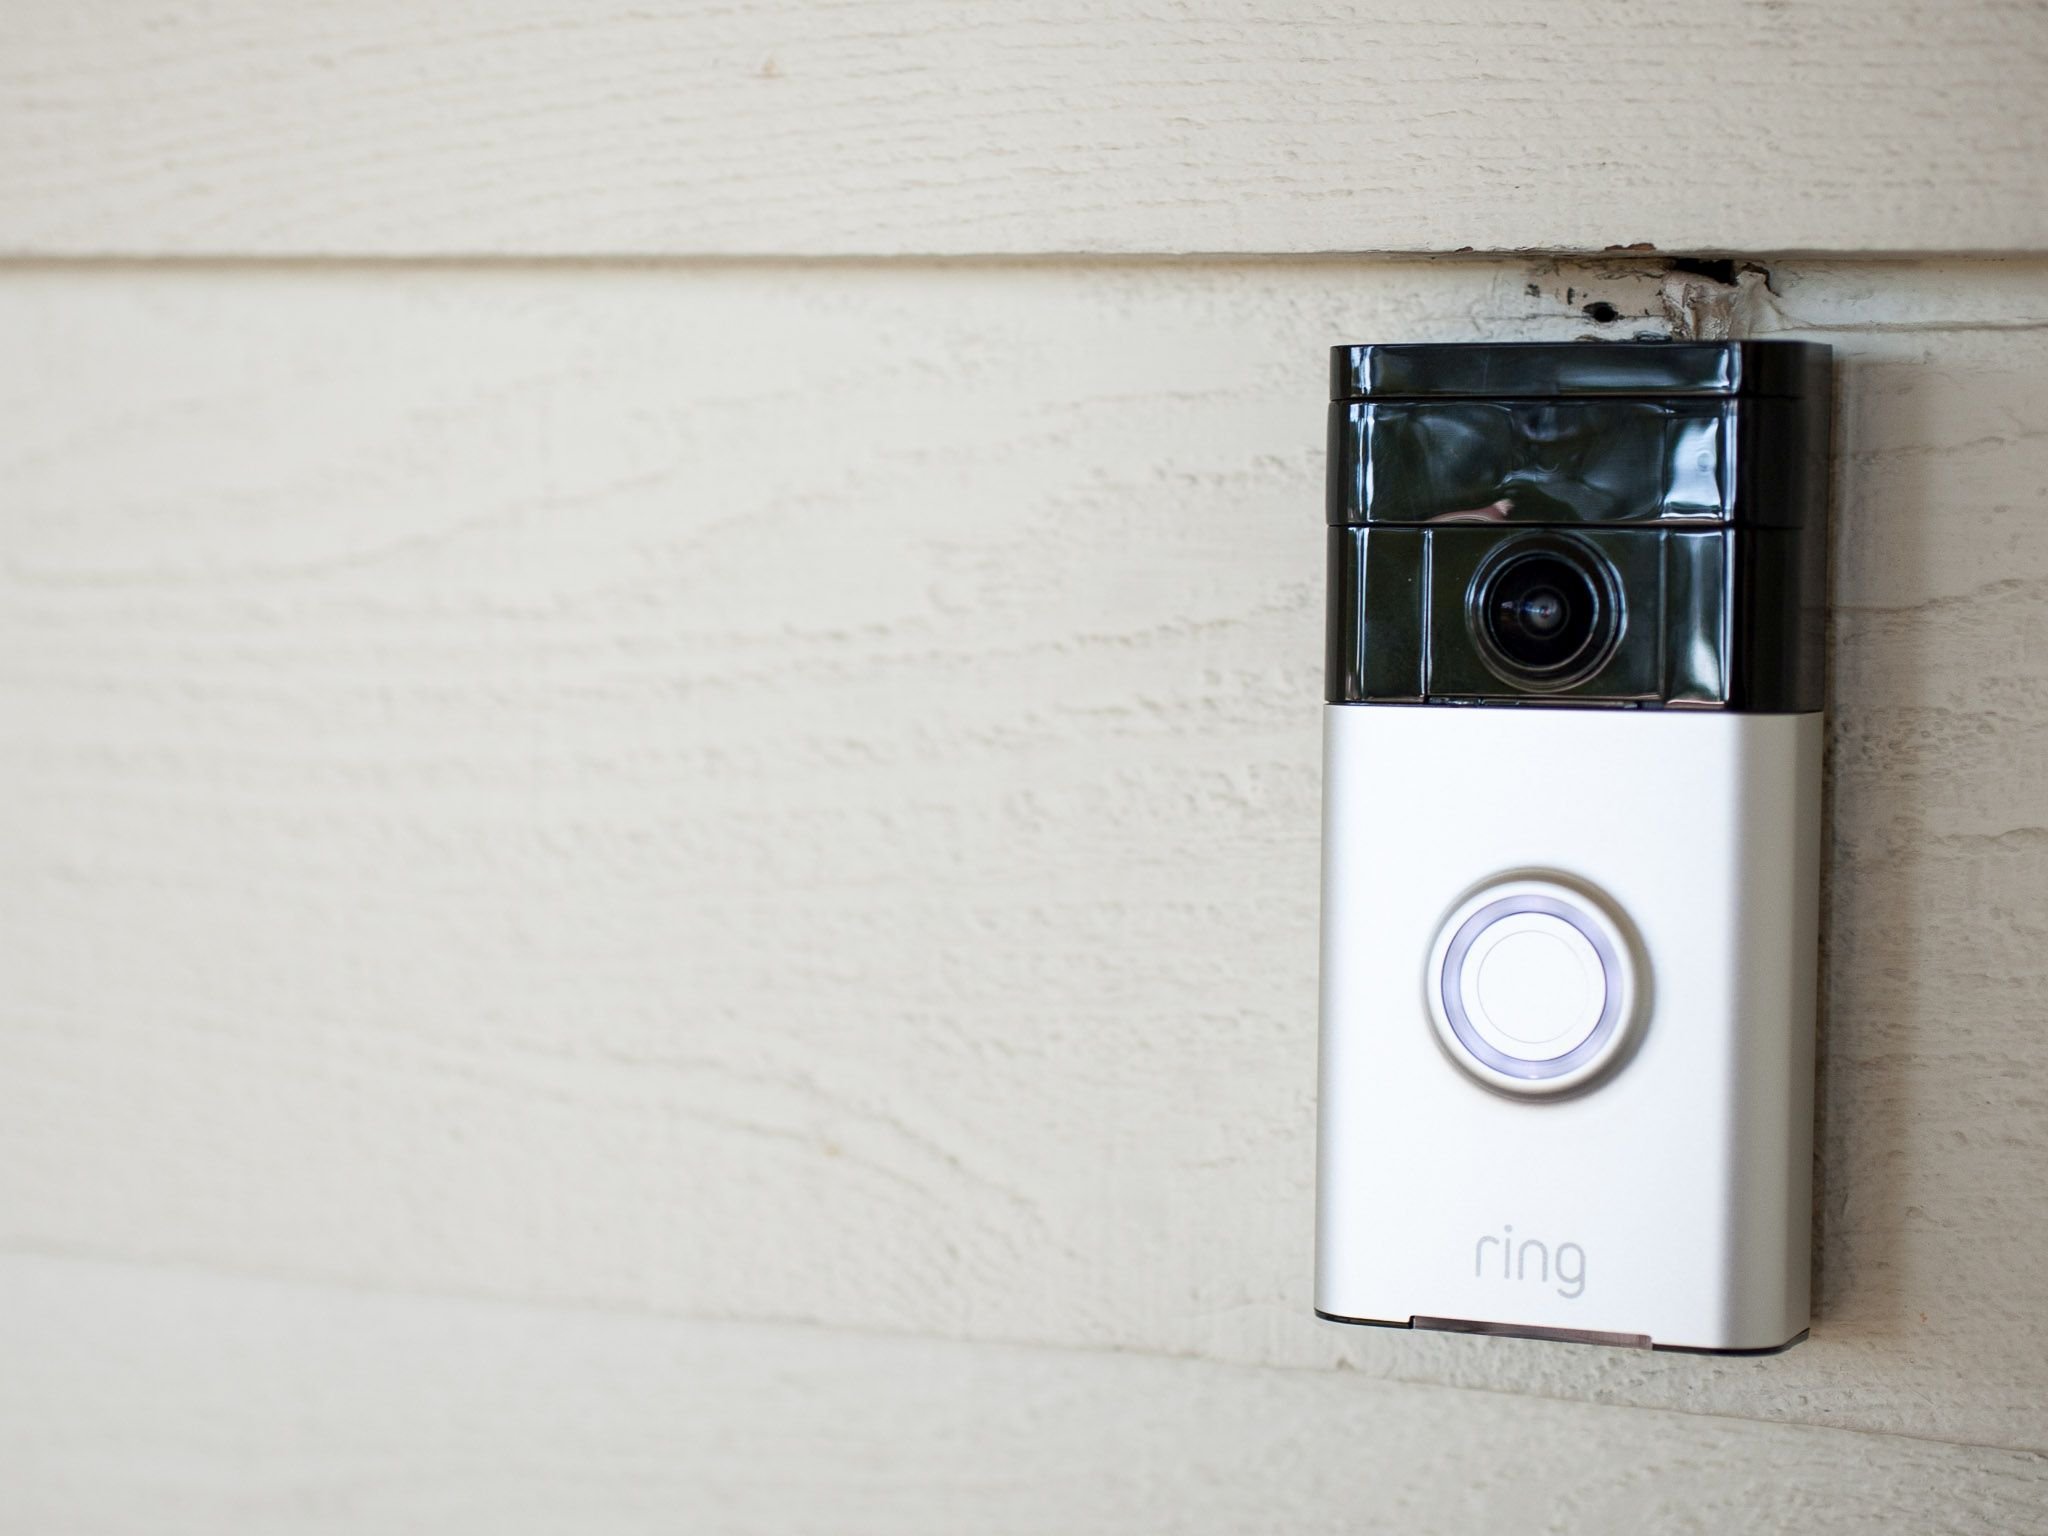 The Ring Video Doorbell app for Windows 10 adds support for Mobile